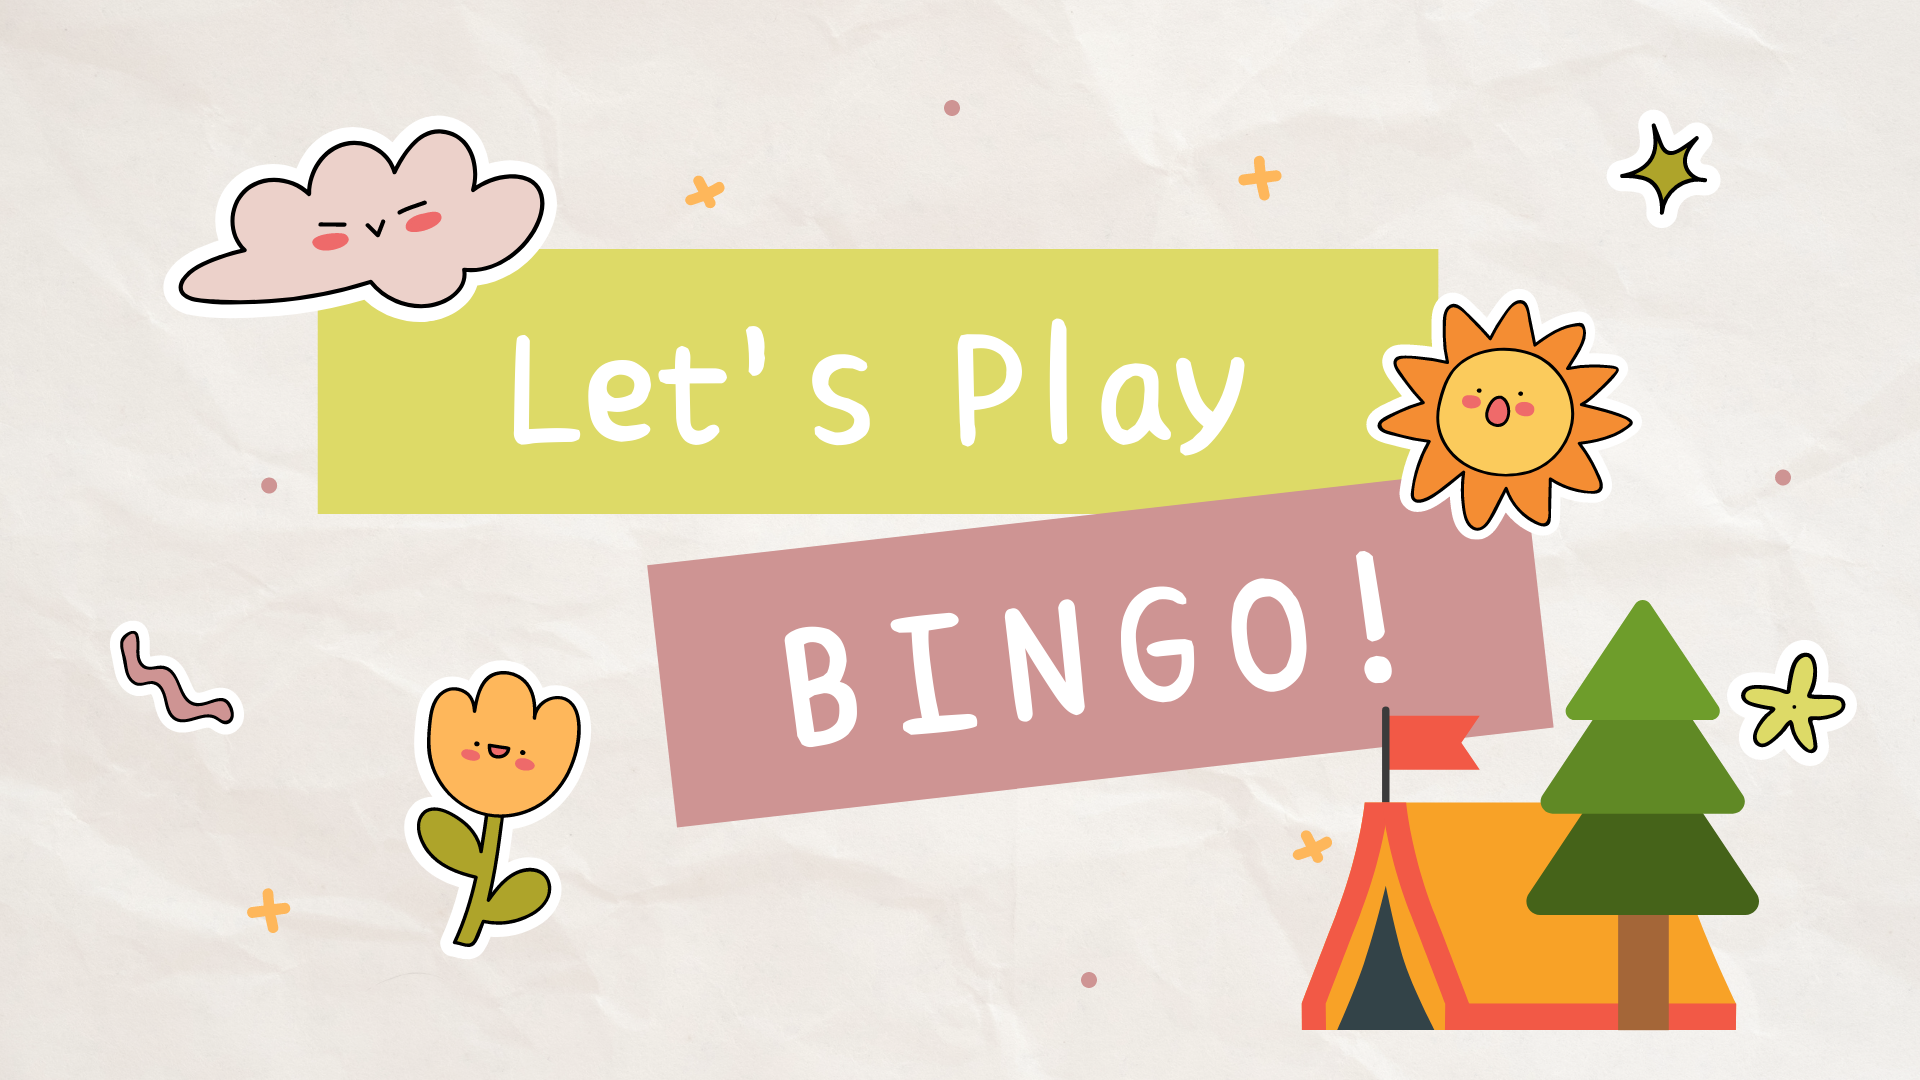 "Let's Play Bingo!" surrounded by camping clip art.